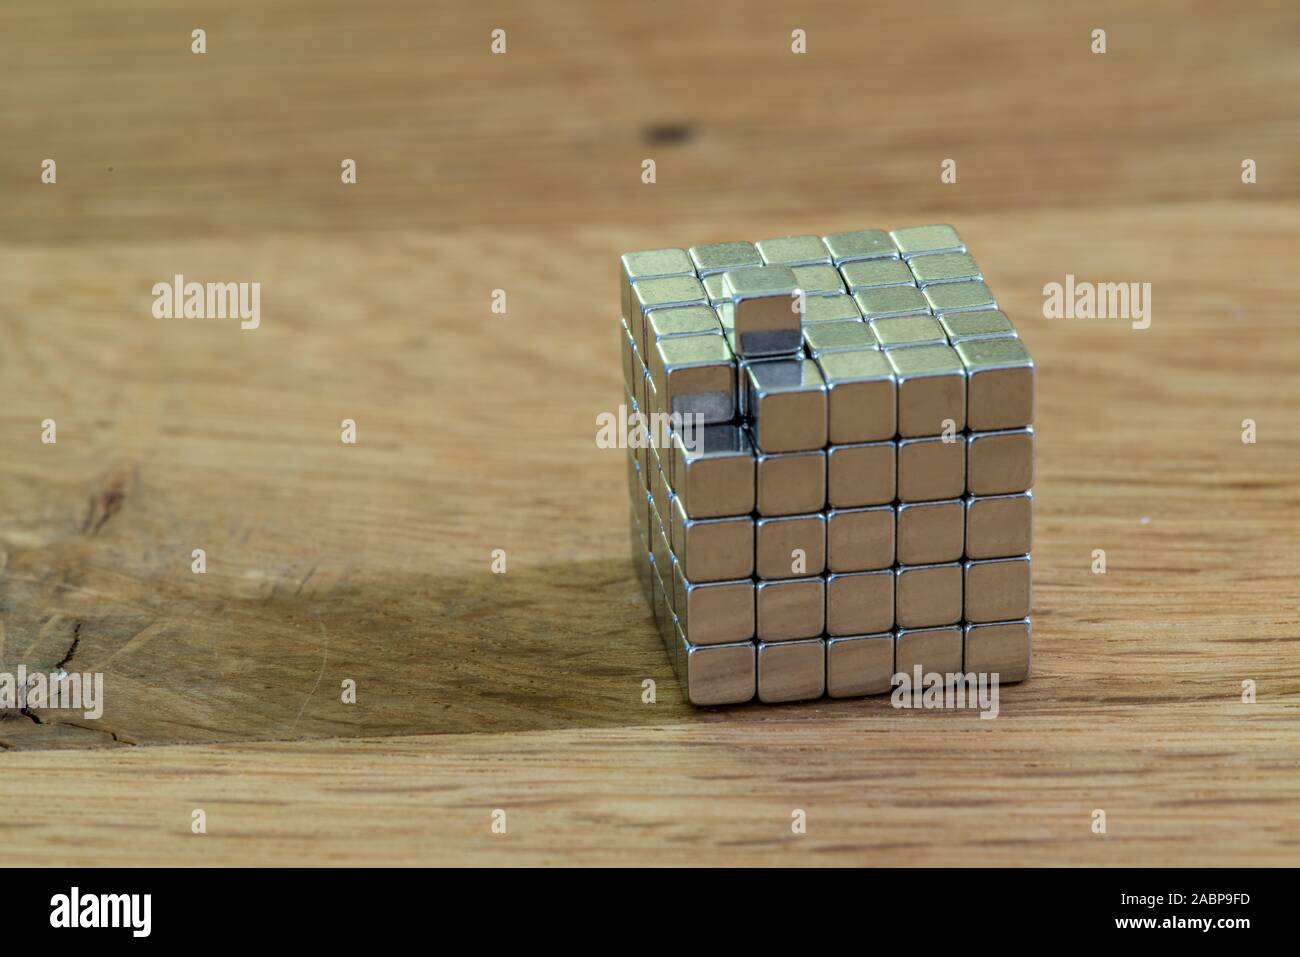 metal ball in a cube of square magnets thinking out of the box Stock Photo  - Alamy